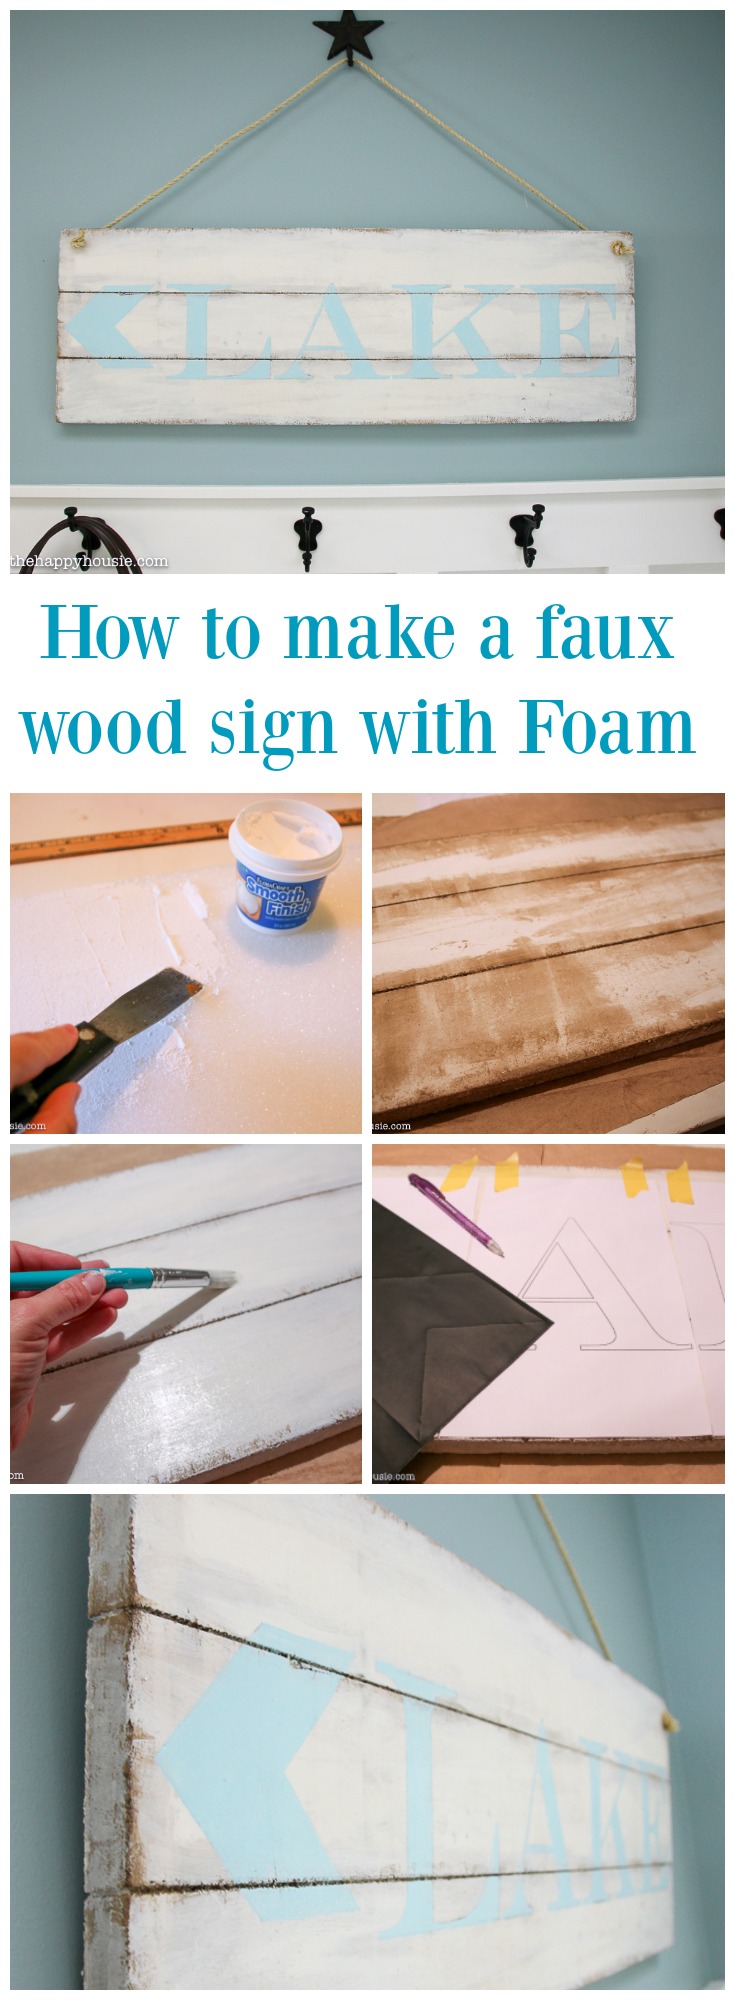 How to make a faux wood sign with FOAM tutorial poster.